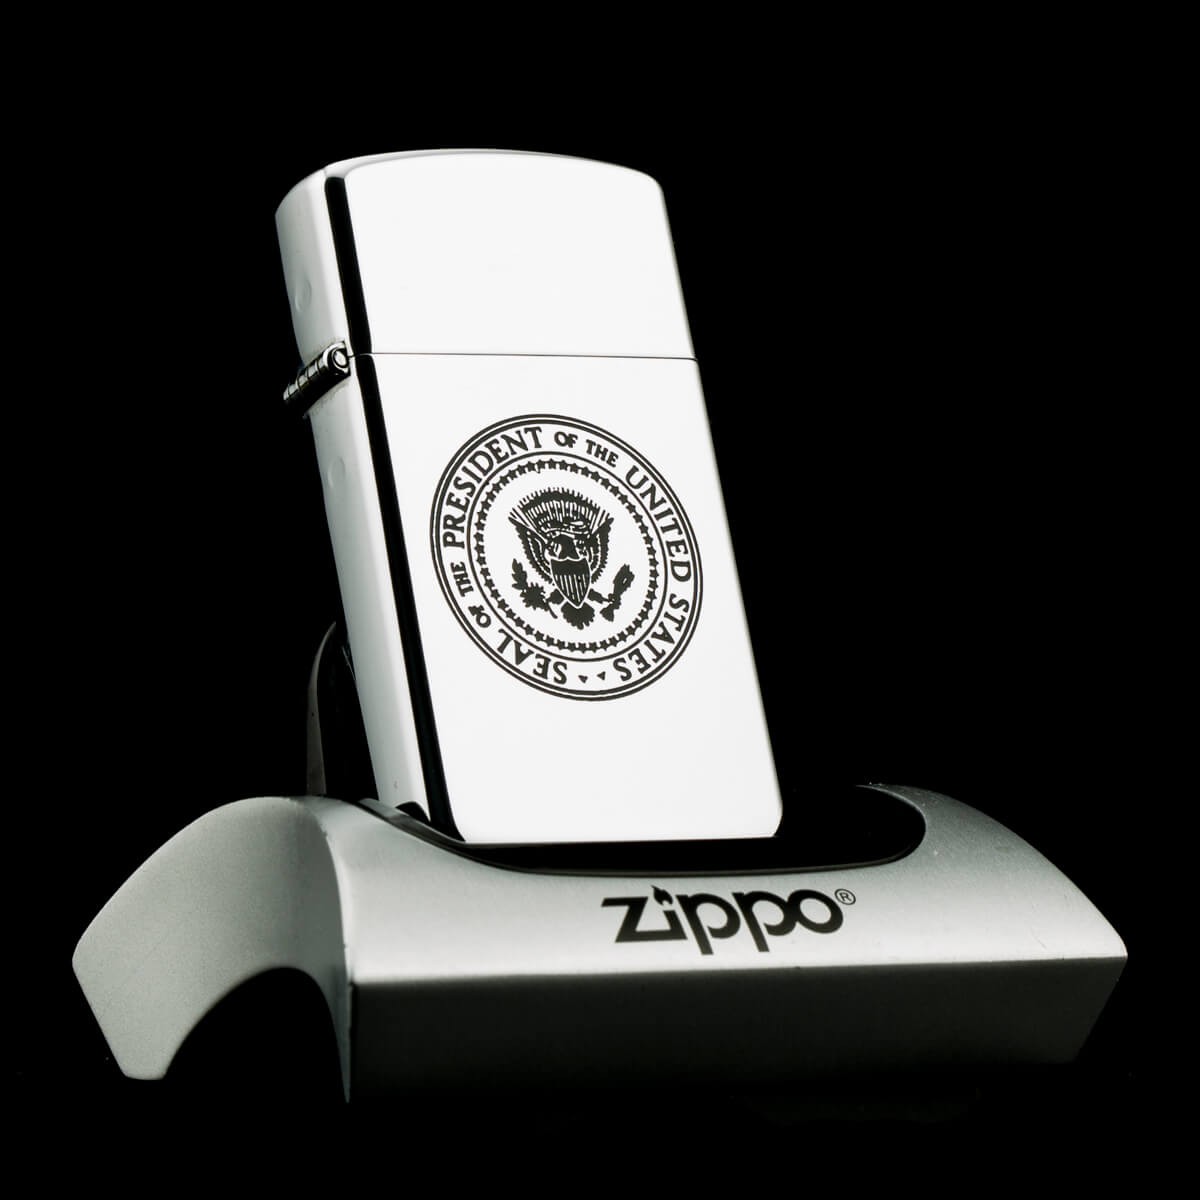 bat-lua-zippo-army-one-seal-of-president-of-the-united-states-iv-1998-huy-hieu-tong-thong-my